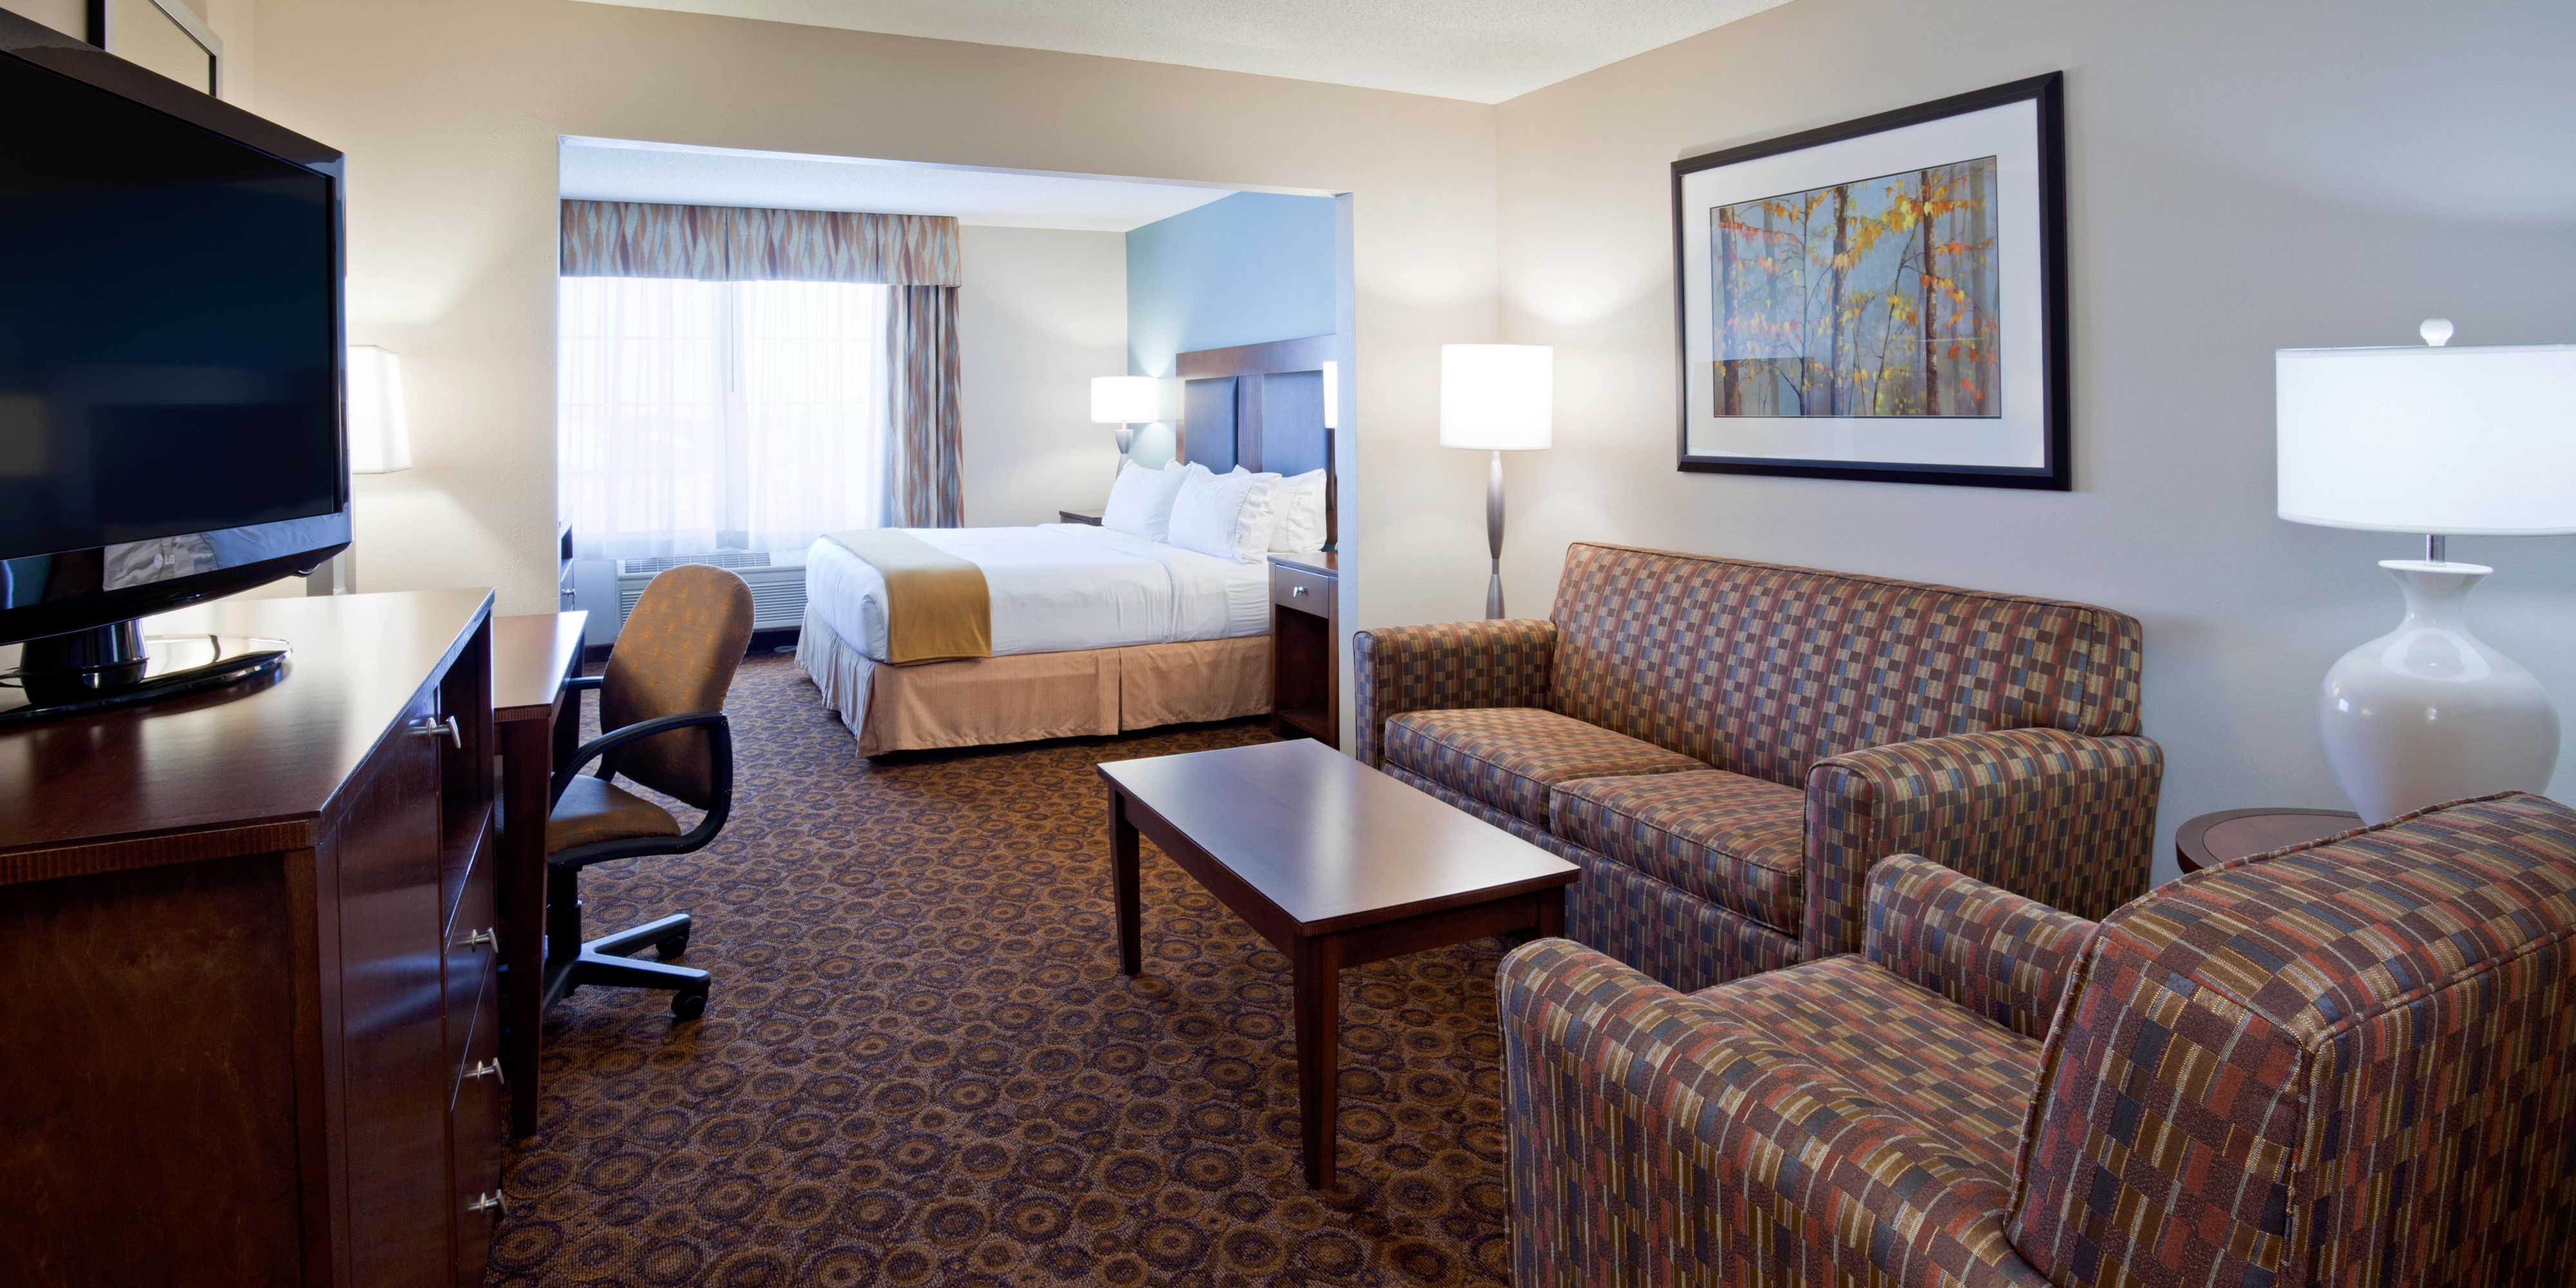 You can relax after a hard day out at work, or use the desk to set up your laptop and work from the comforts of the room. Either way the Single King room with a pull-out sofa couch is made with our Business Travelers in mind. 